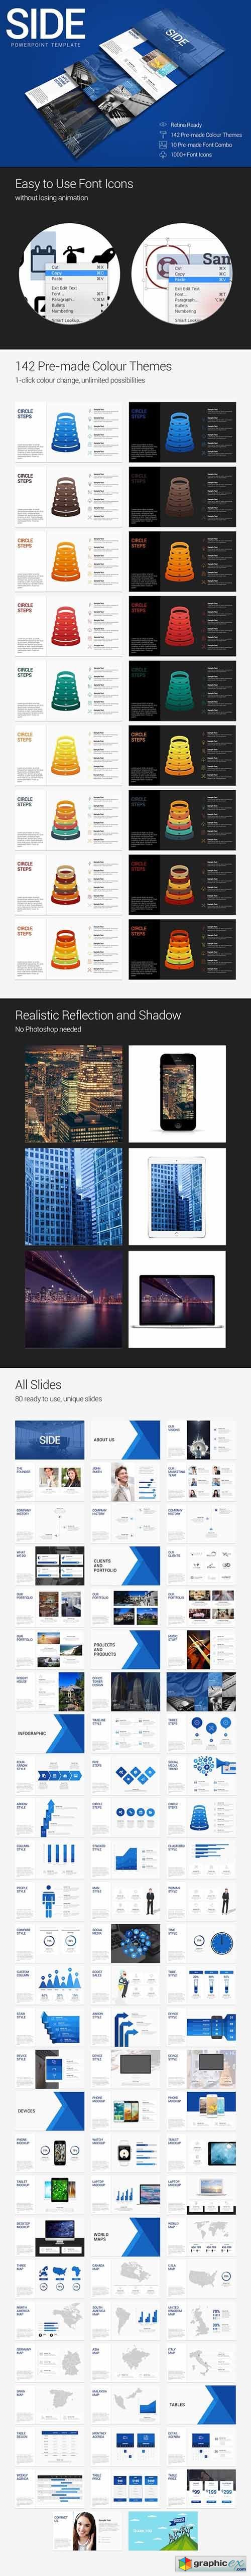 SIDE - PowerPoint Template